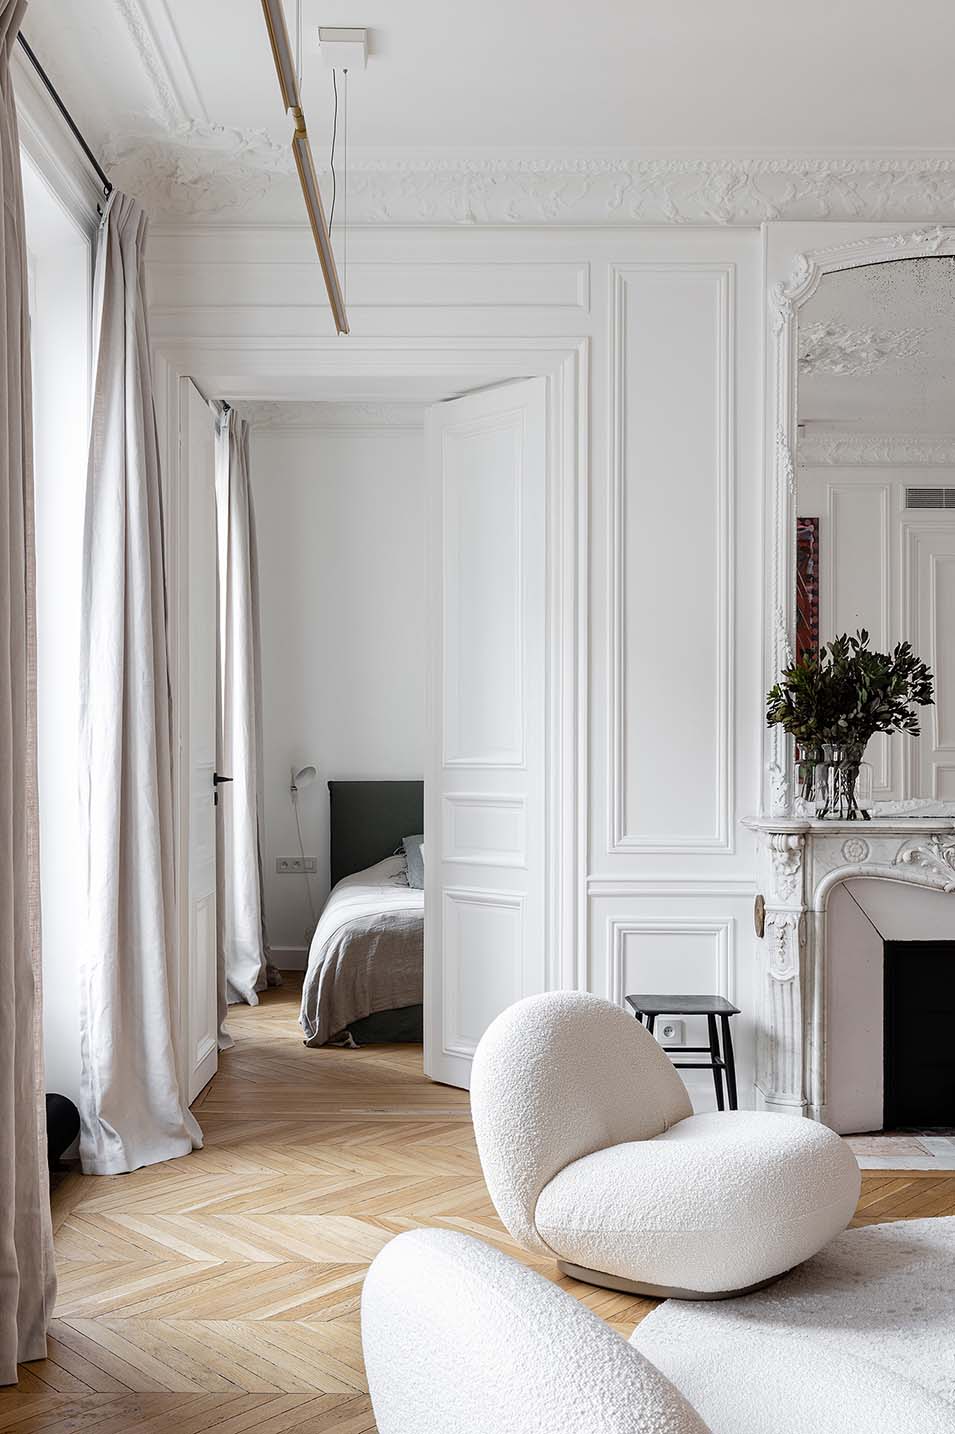 Contact an interior designer in Paris and in Île-de-France